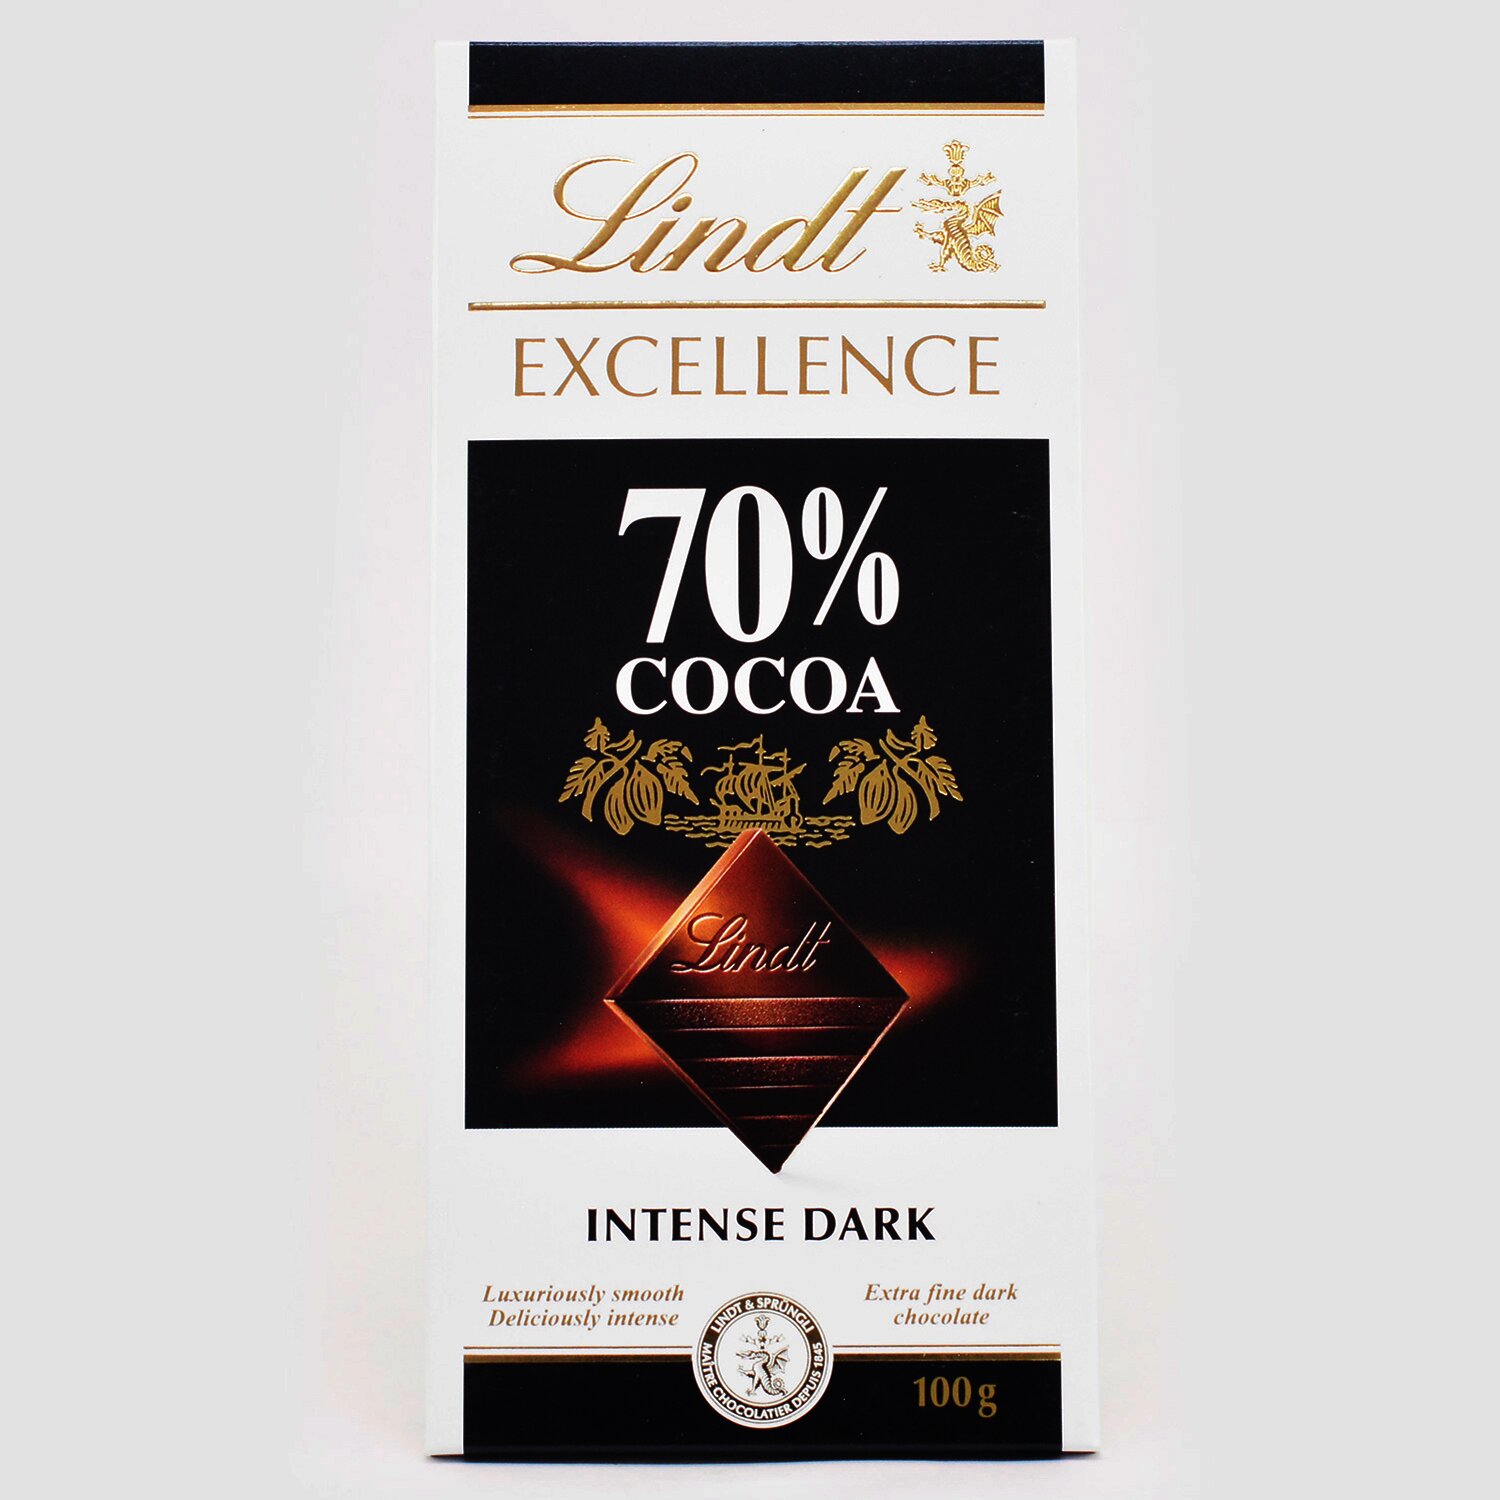 Lindt Intense Dark Chicilate by Lindt Excellence